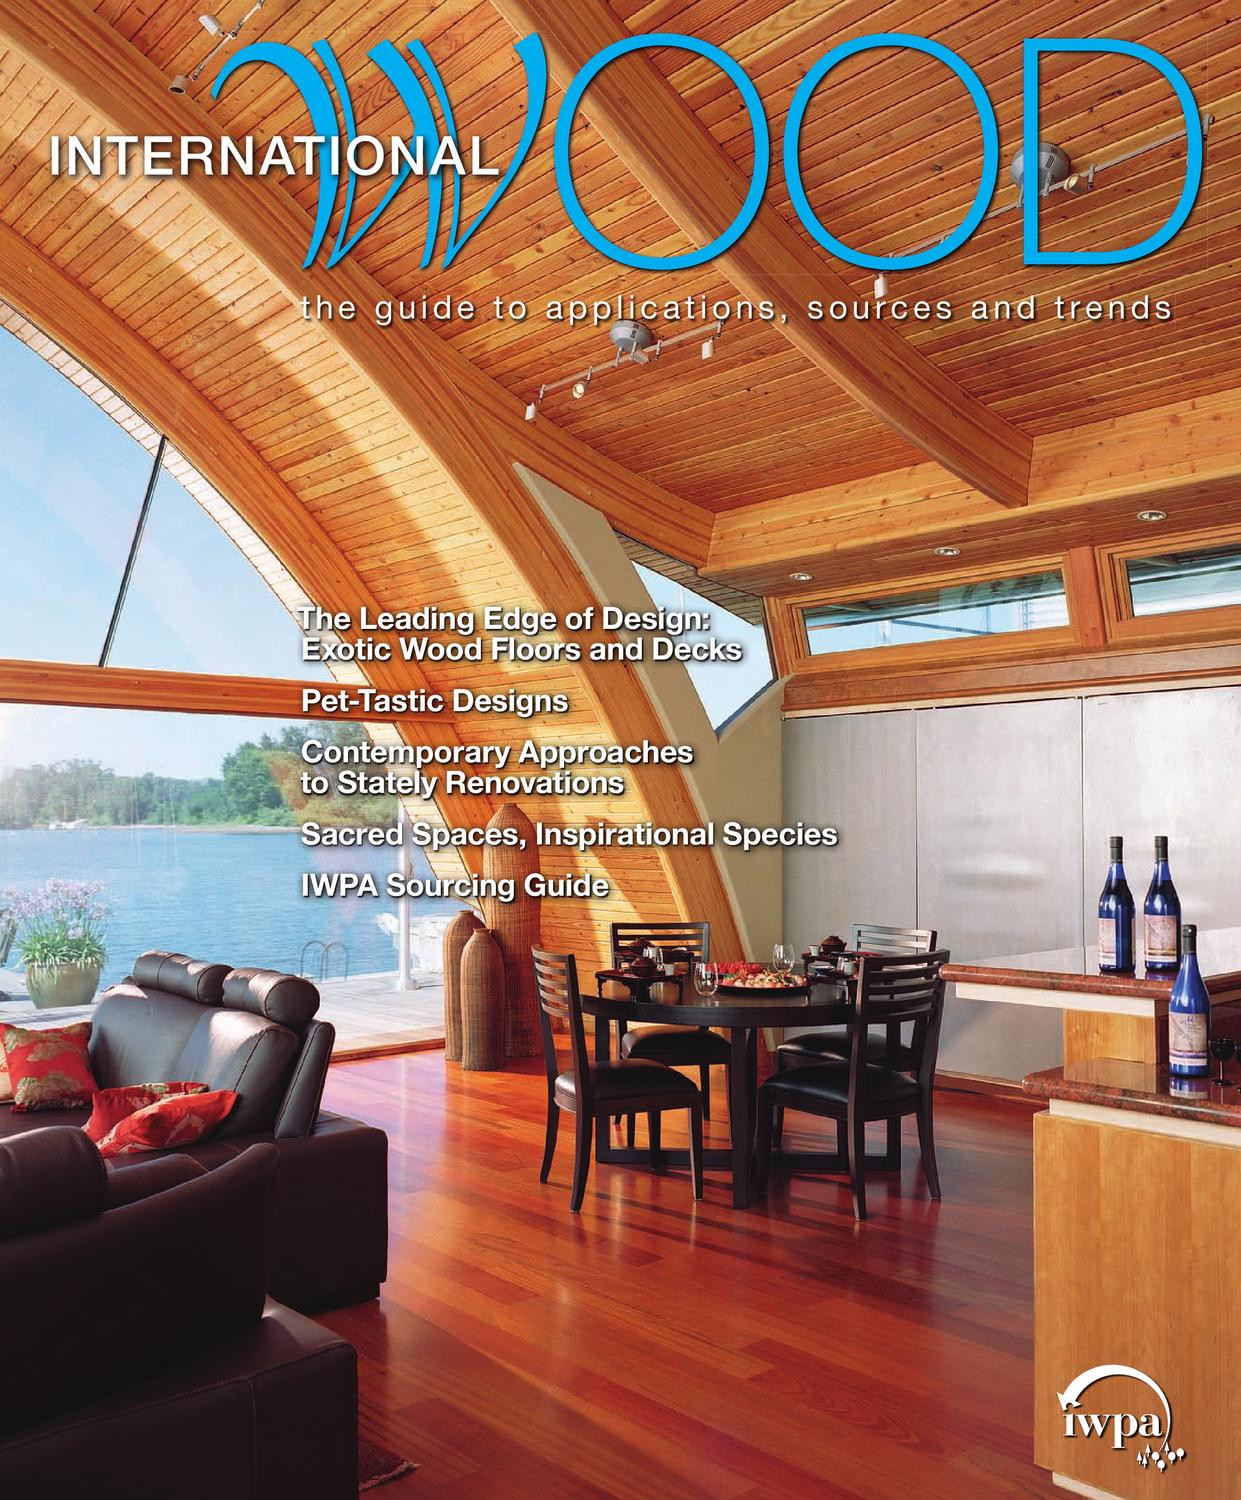 16 Lovely Santos Mahogany Hardwood Flooring Prices 2024 free download santos mahogany hardwood flooring prices of international wood magazine 09 by bedford falls communications issuu with page 1